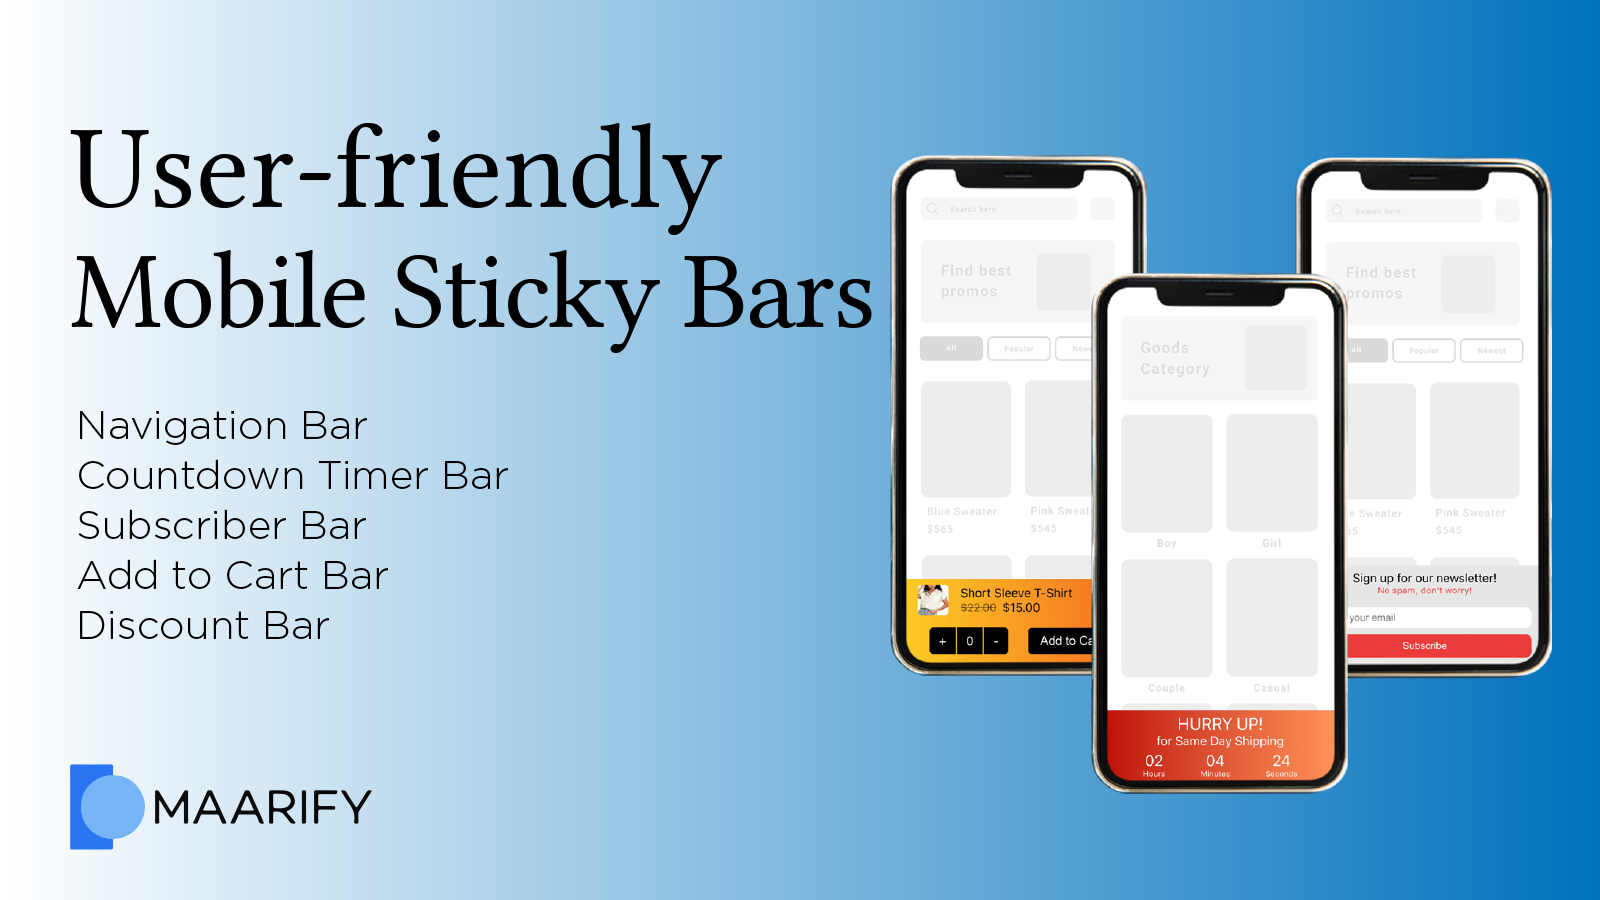 User-friendly Mobile Bars with different objectives